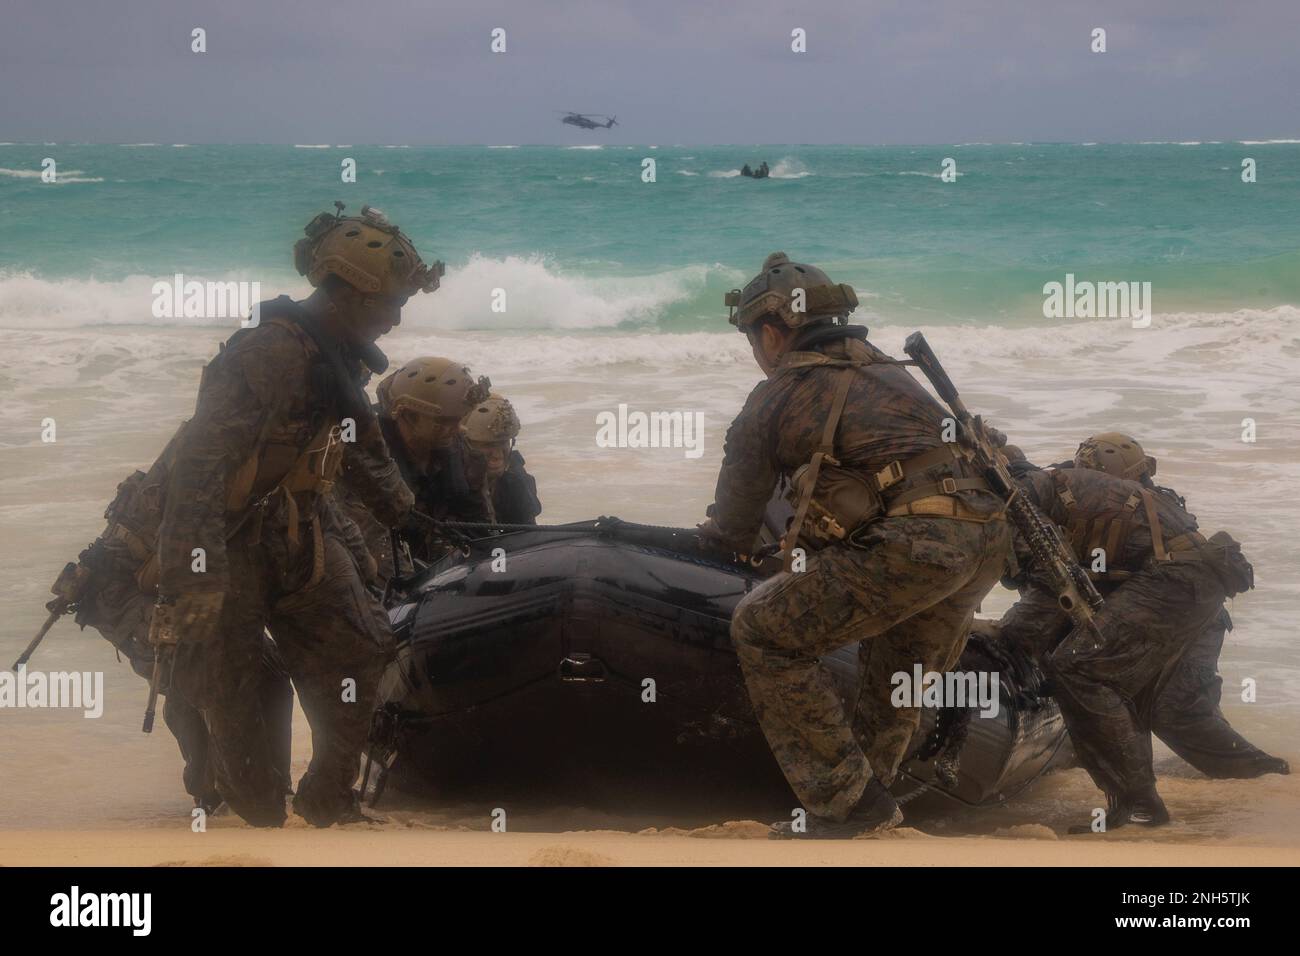 MARINE CORPS TRAINING AREA BELLOWS, Hawaii (July 18, 2022) U.S. Marines with 3rd Reconnaissance Battalion, 3rd Marine Division and Australian Army Soldiers pull a combat rubber raiding craft onto the beach for helo-cast training during Rim of the Pacific (RIMPAC) 2022, at Marine Corps Training Area Bellows, Hawaii, July 18. Twenty-six nations, 38 ships, four submarines, more than 170 aircraft and 25,000 personnel are participating in RIMPAC from June 29 to Aug. 4 in and around the Hawaiian Islands and Southern California. The world's largest international maritime exercise, RIMPAC provides a u Stock Photo